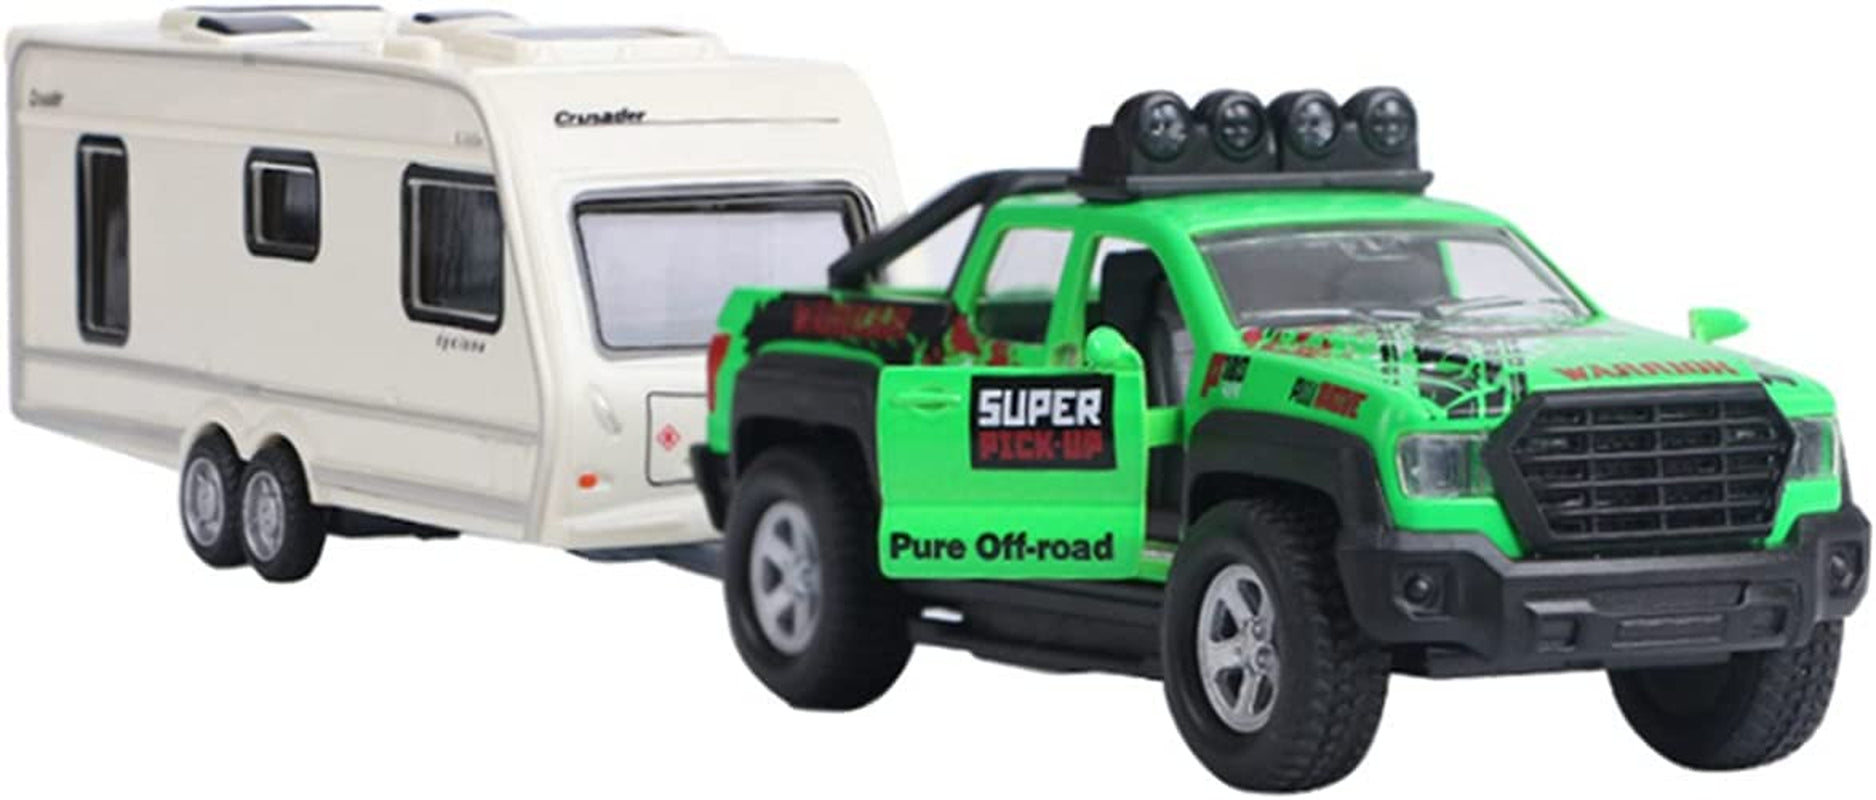 Monster Pickup Truck Trailer with Toy Camper RV Motorhome Toys for Boys Diecast Model Car Metal Toy Cars 1/36 Scale Off-Road SUV Pull Back Friction Powered Doors Open Light Sound Kids Gifts, Green